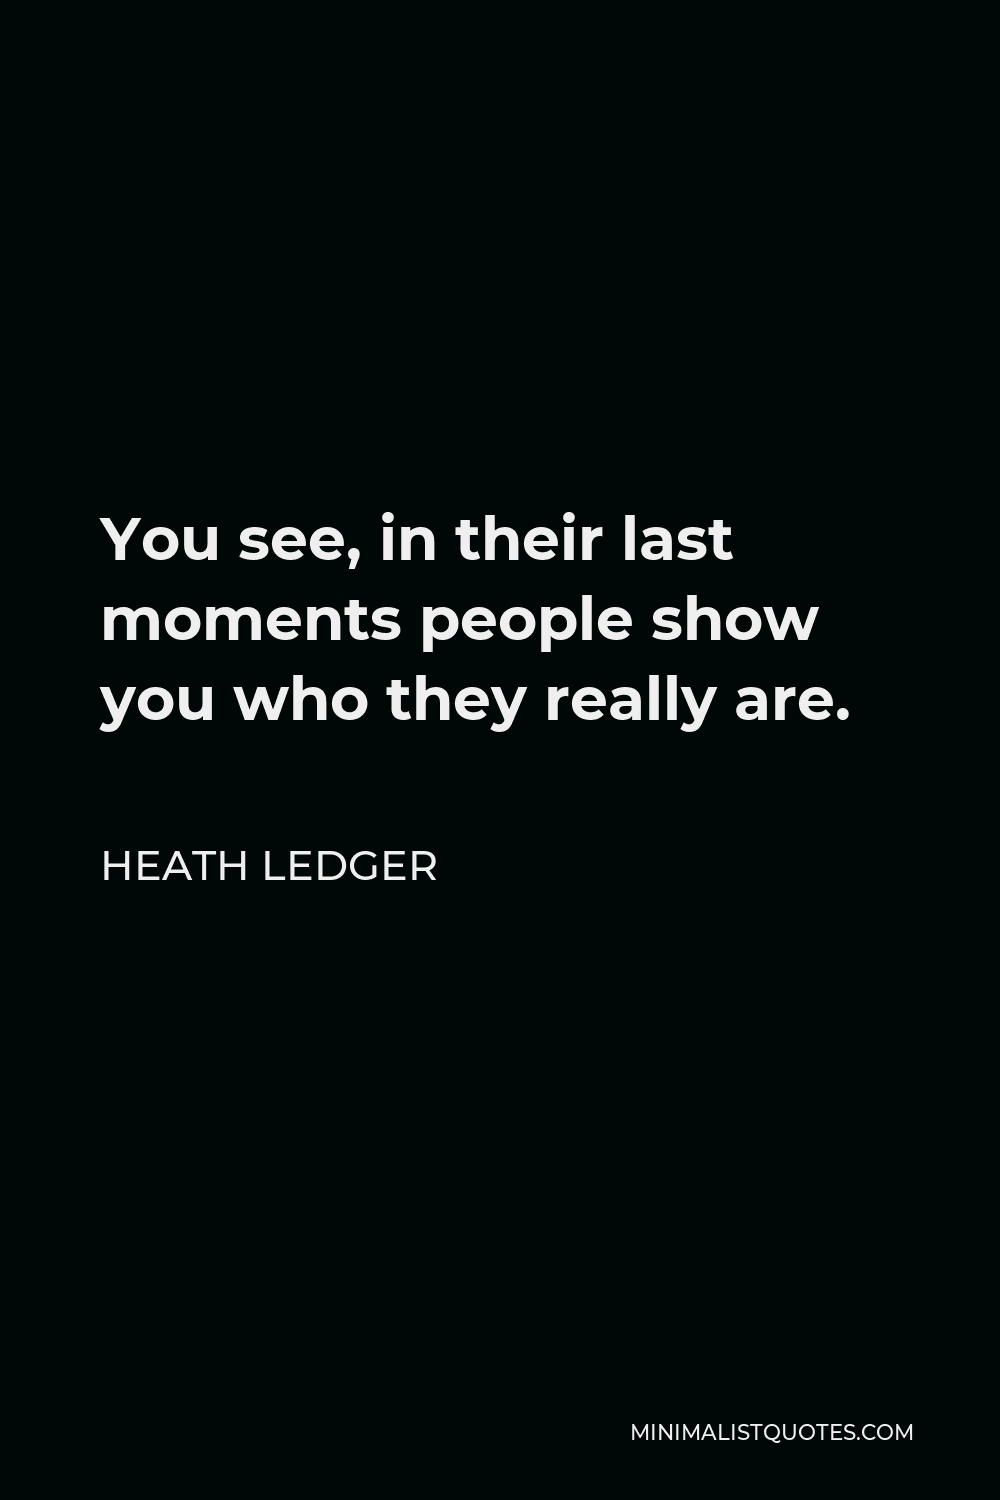 Heath Ledger Quote - You see, in their last moments people show you who they really are.